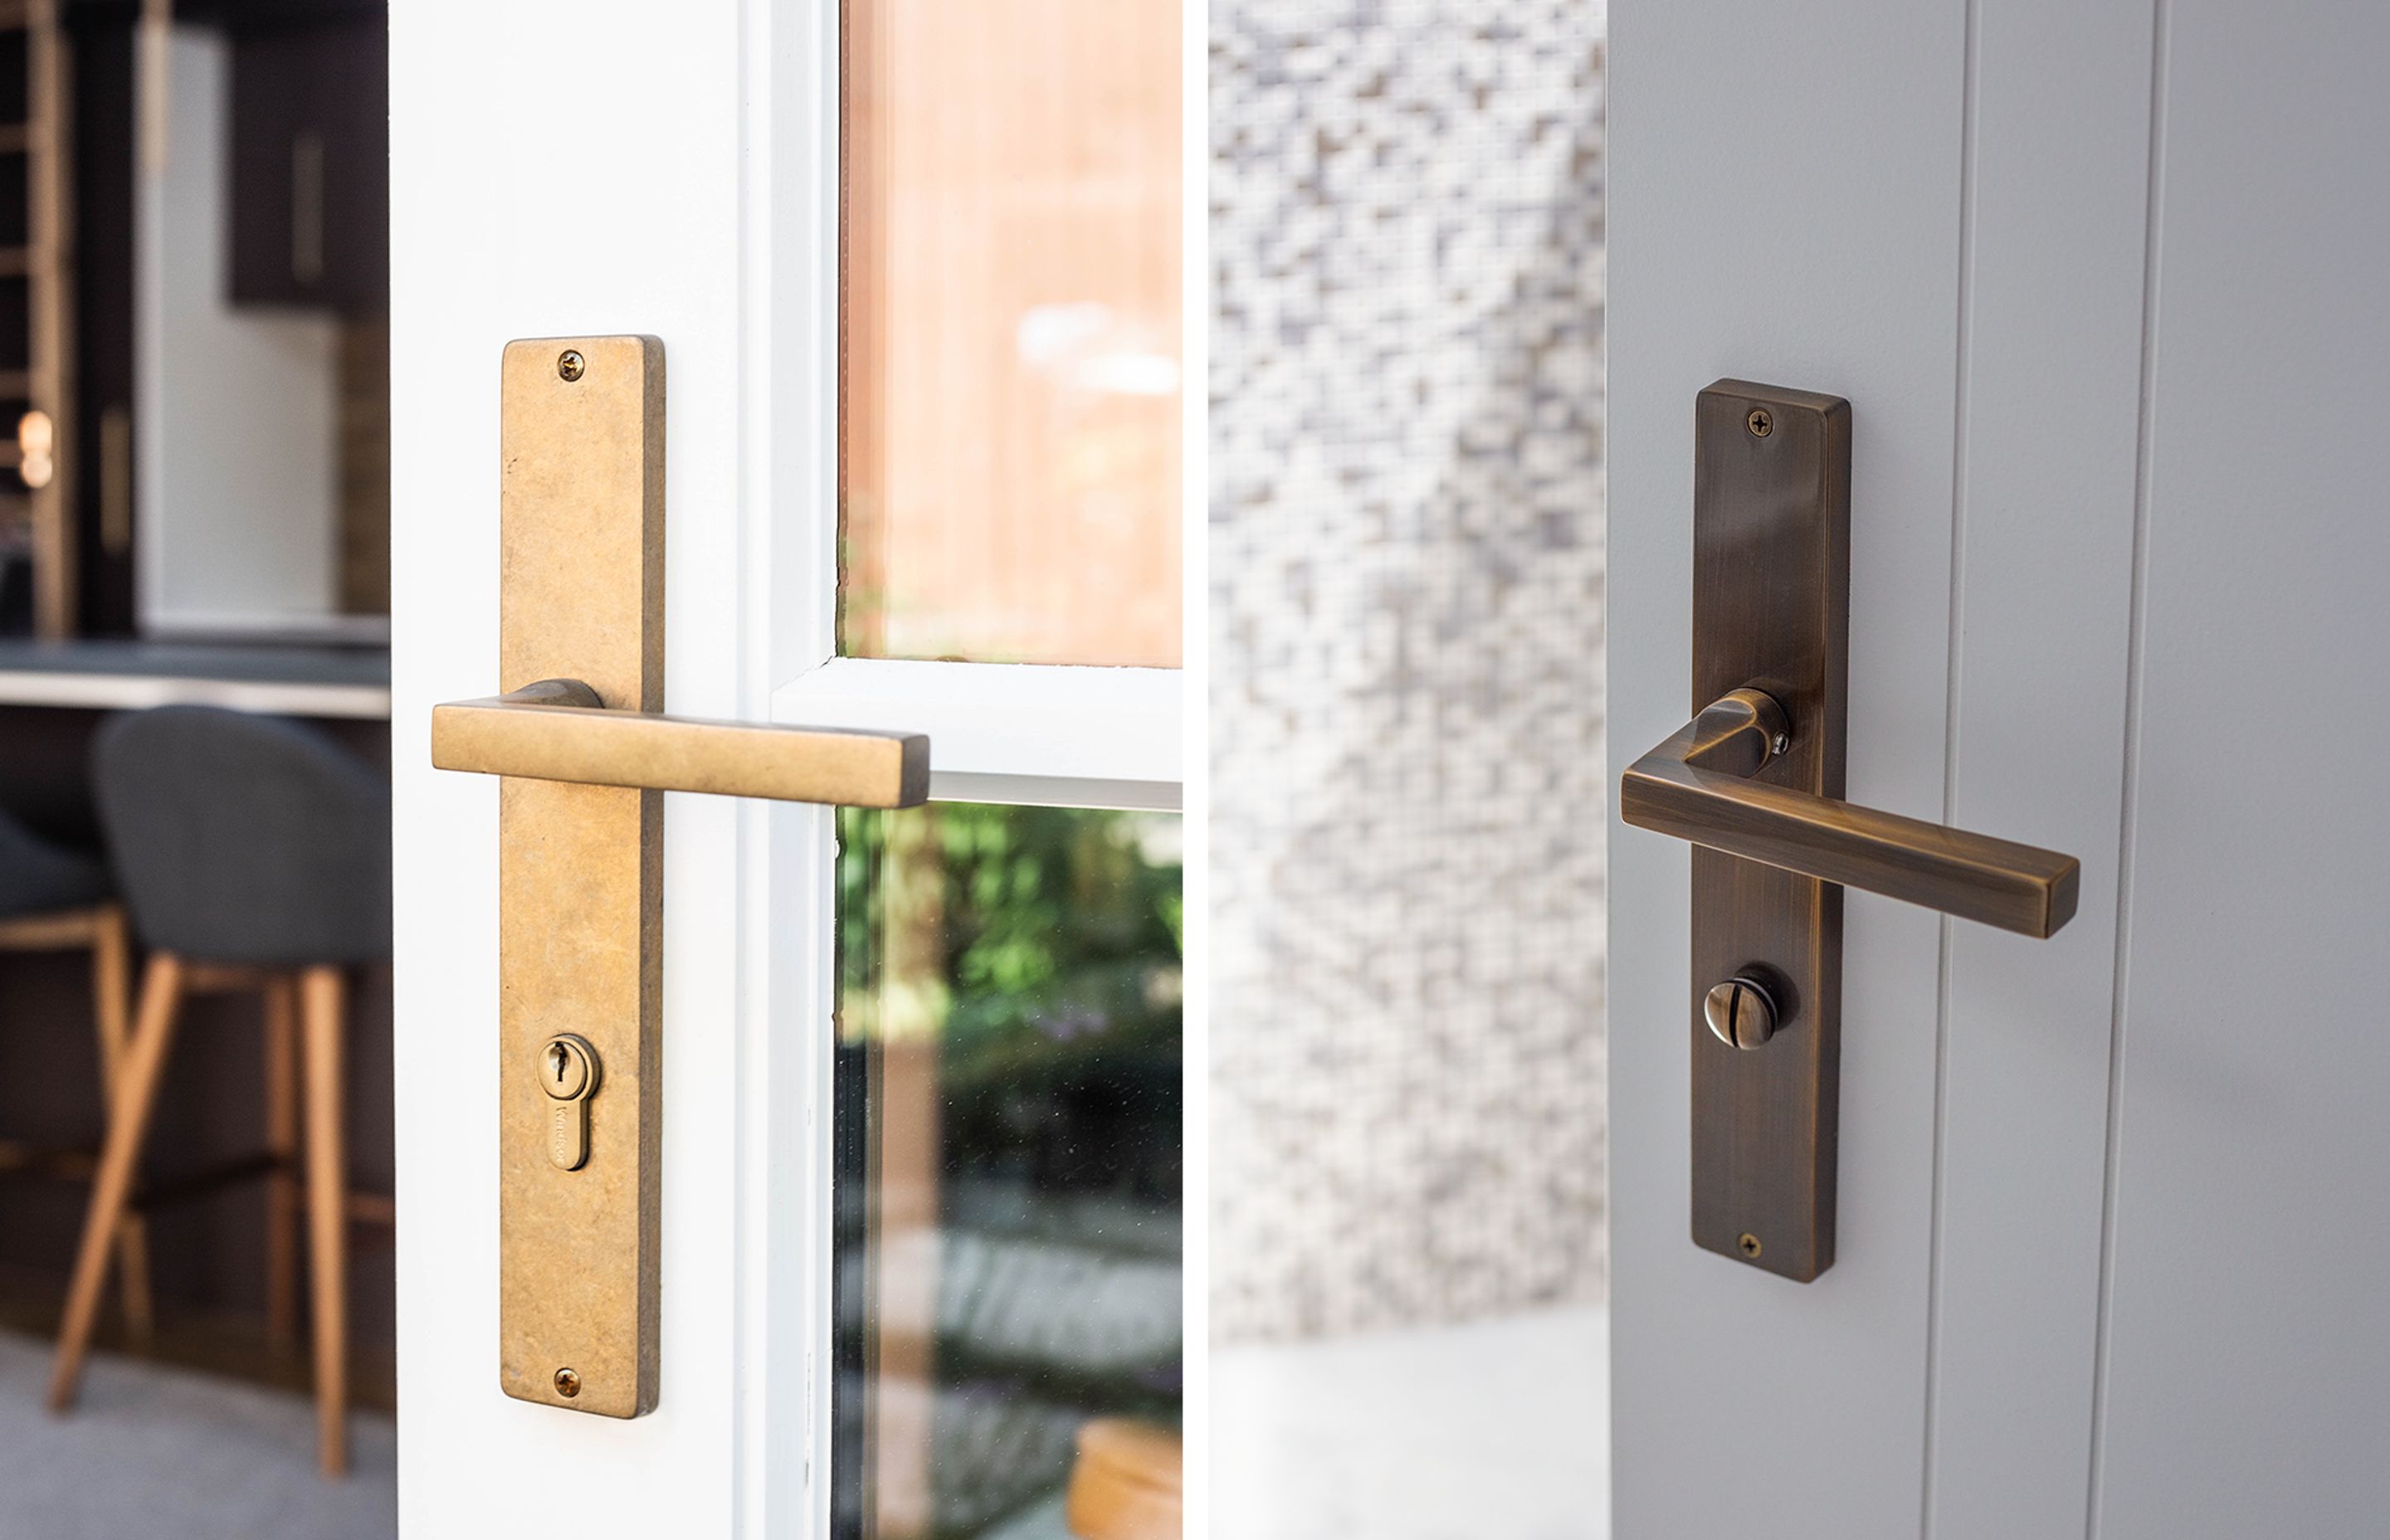 Windsor's hand finishes are available in three categories: Living finishes and Gloss and Matt Lacquered finishes, each bringing its own distinctive allure to its solid brass hardware.